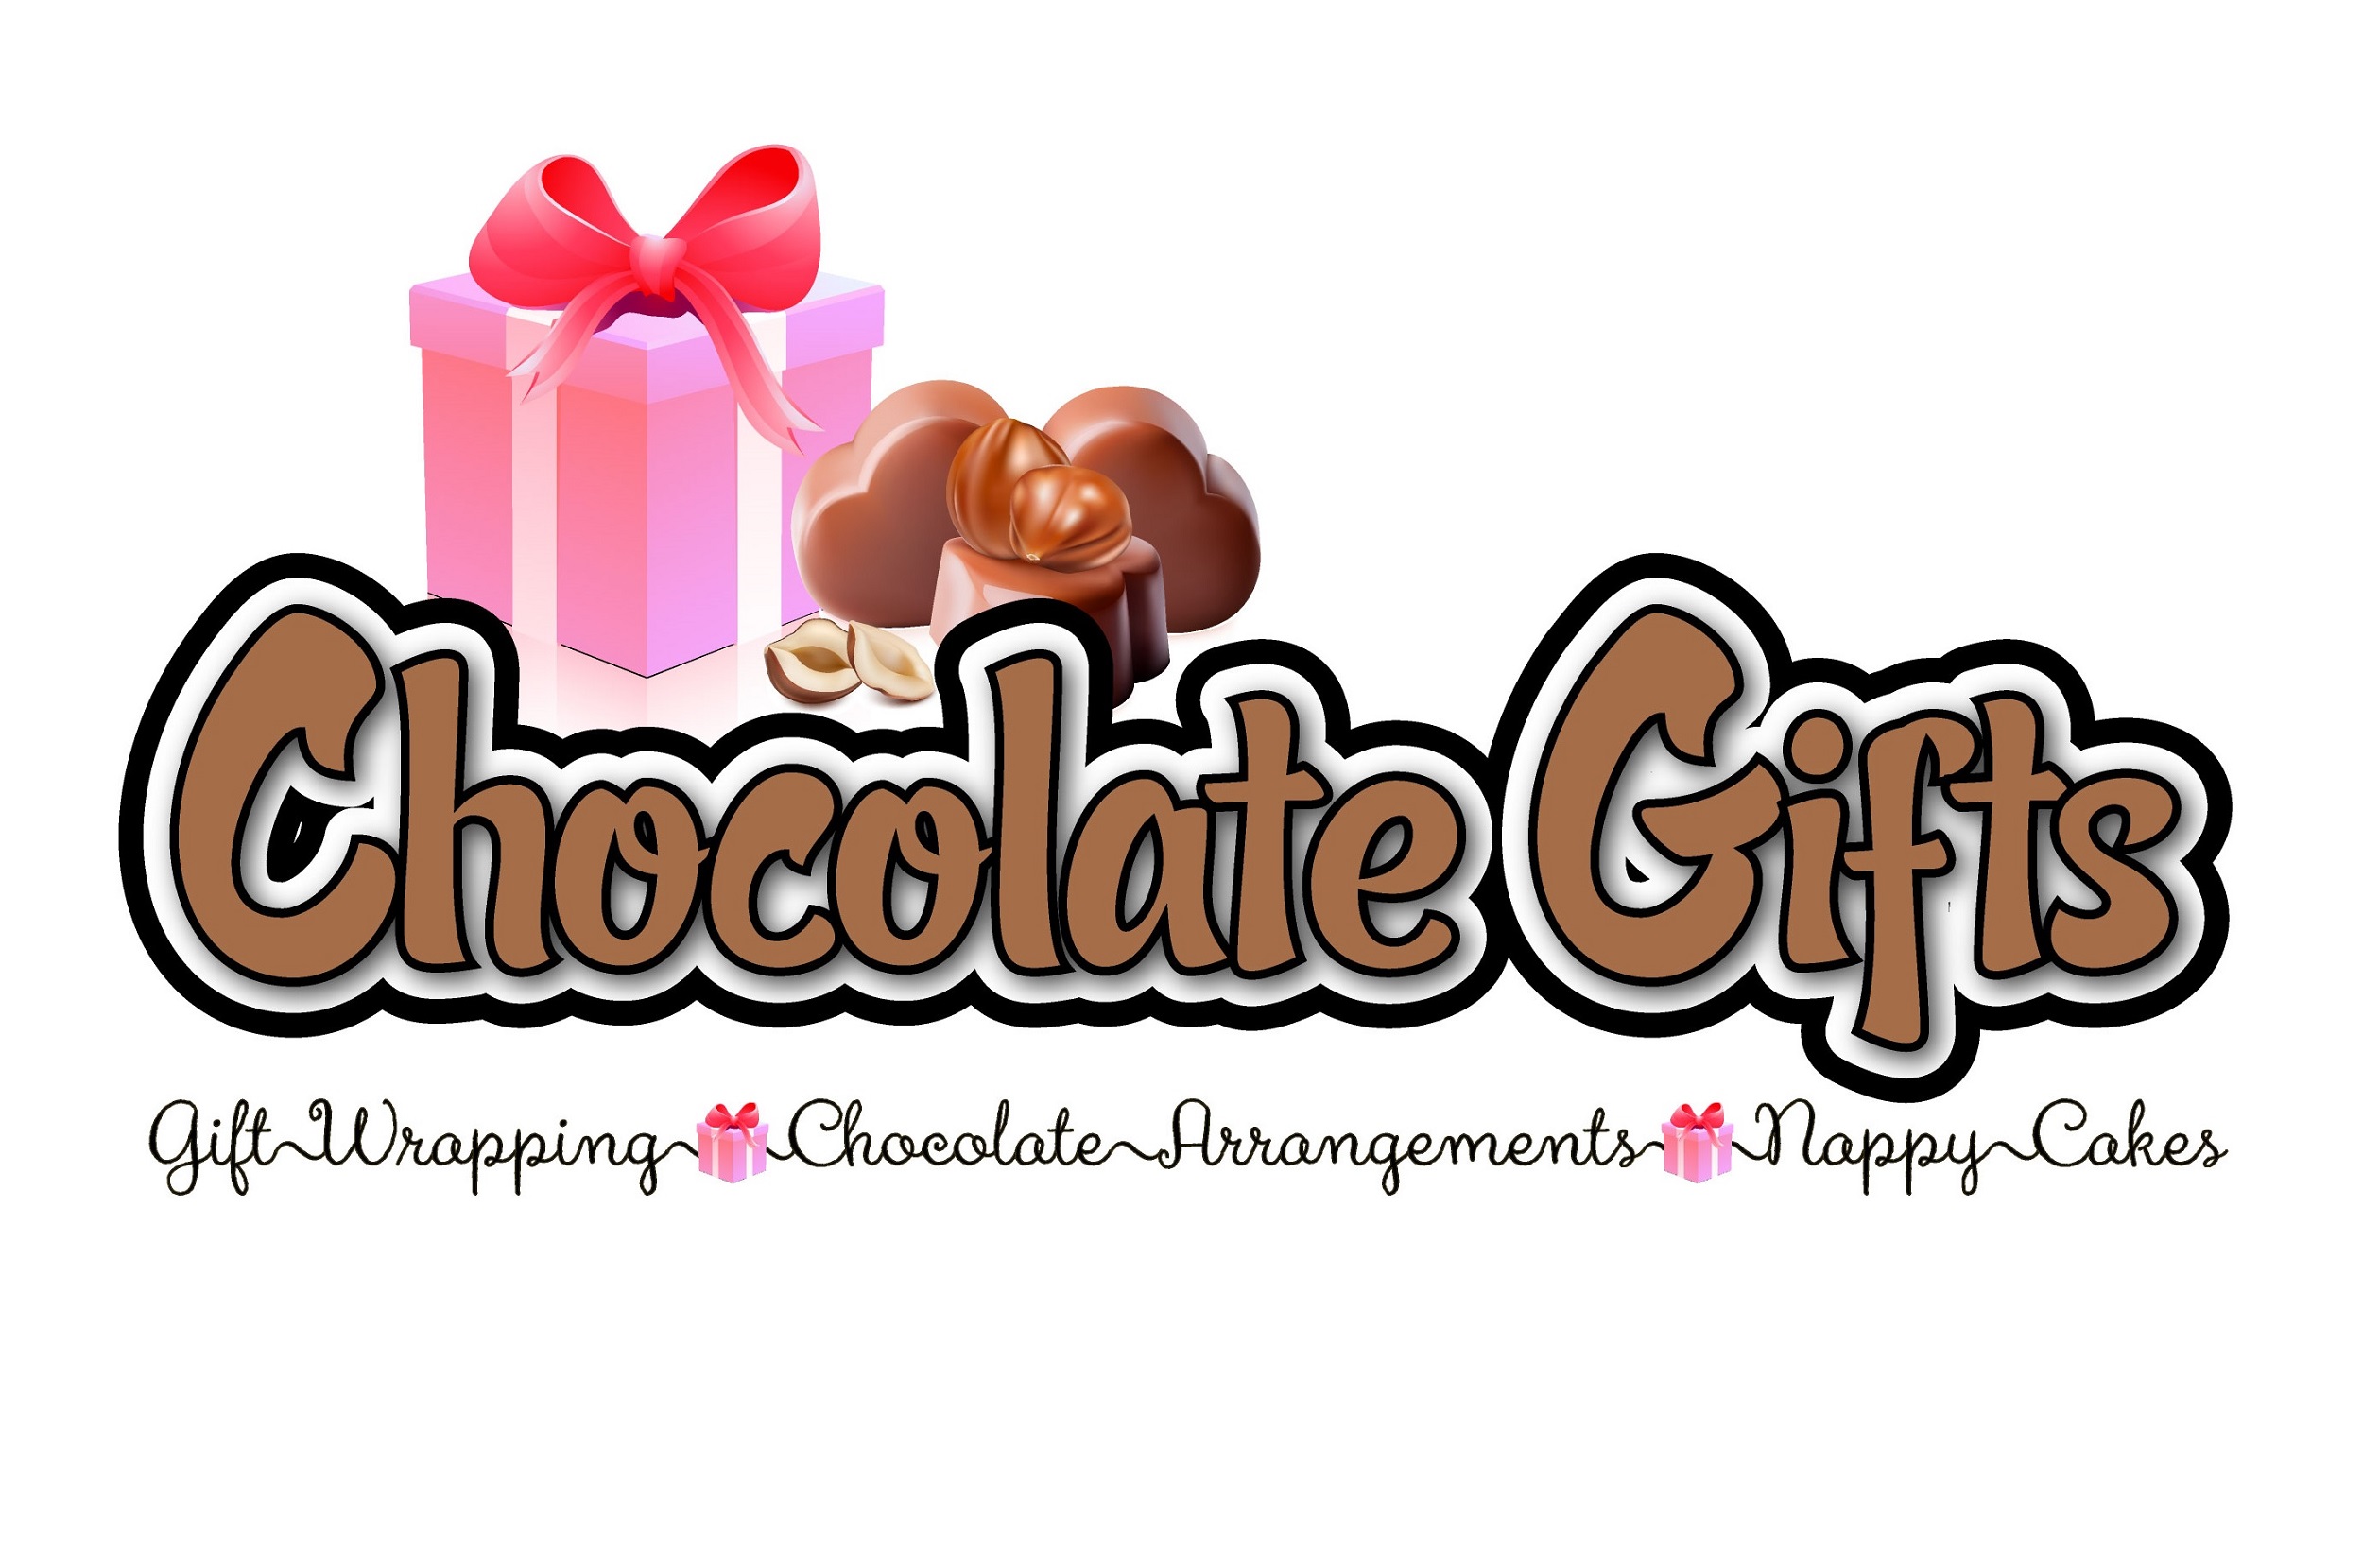 Chocolate Gifts Manchester